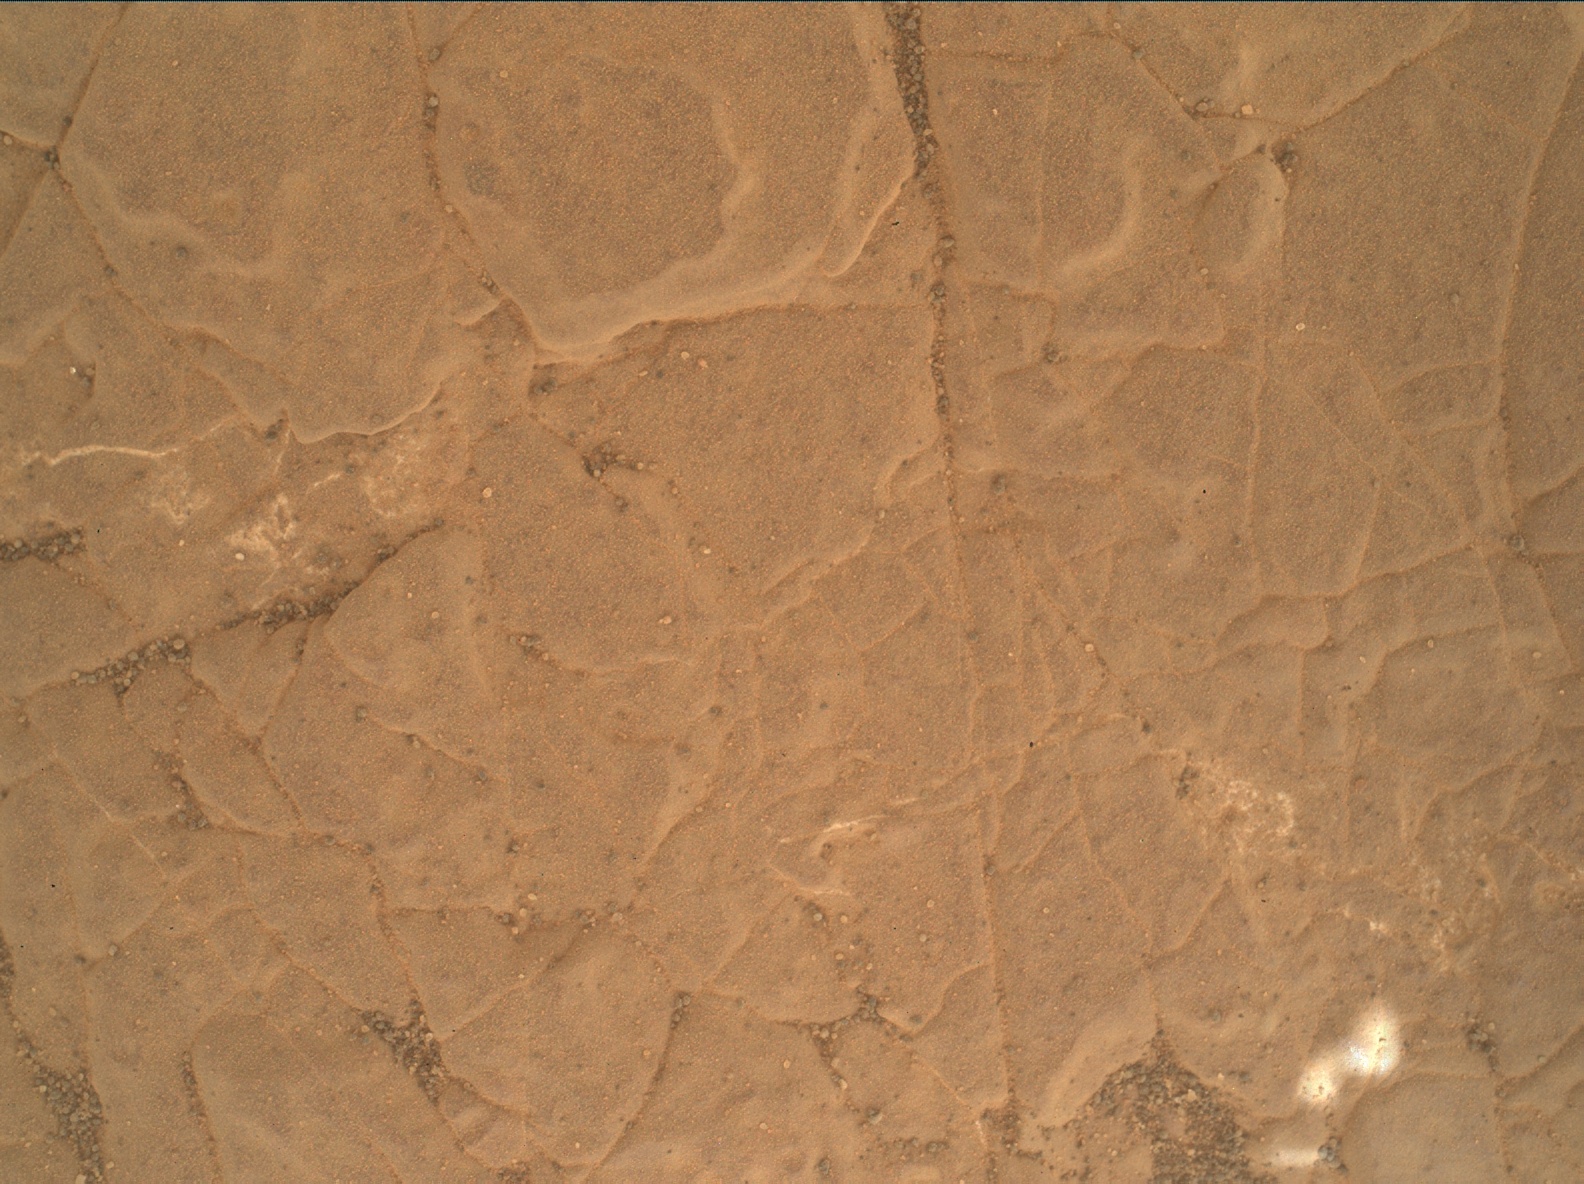 Nasa's Mars rover Curiosity acquired this image using its Mars Hand Lens Imager (MAHLI) on Sol 3020